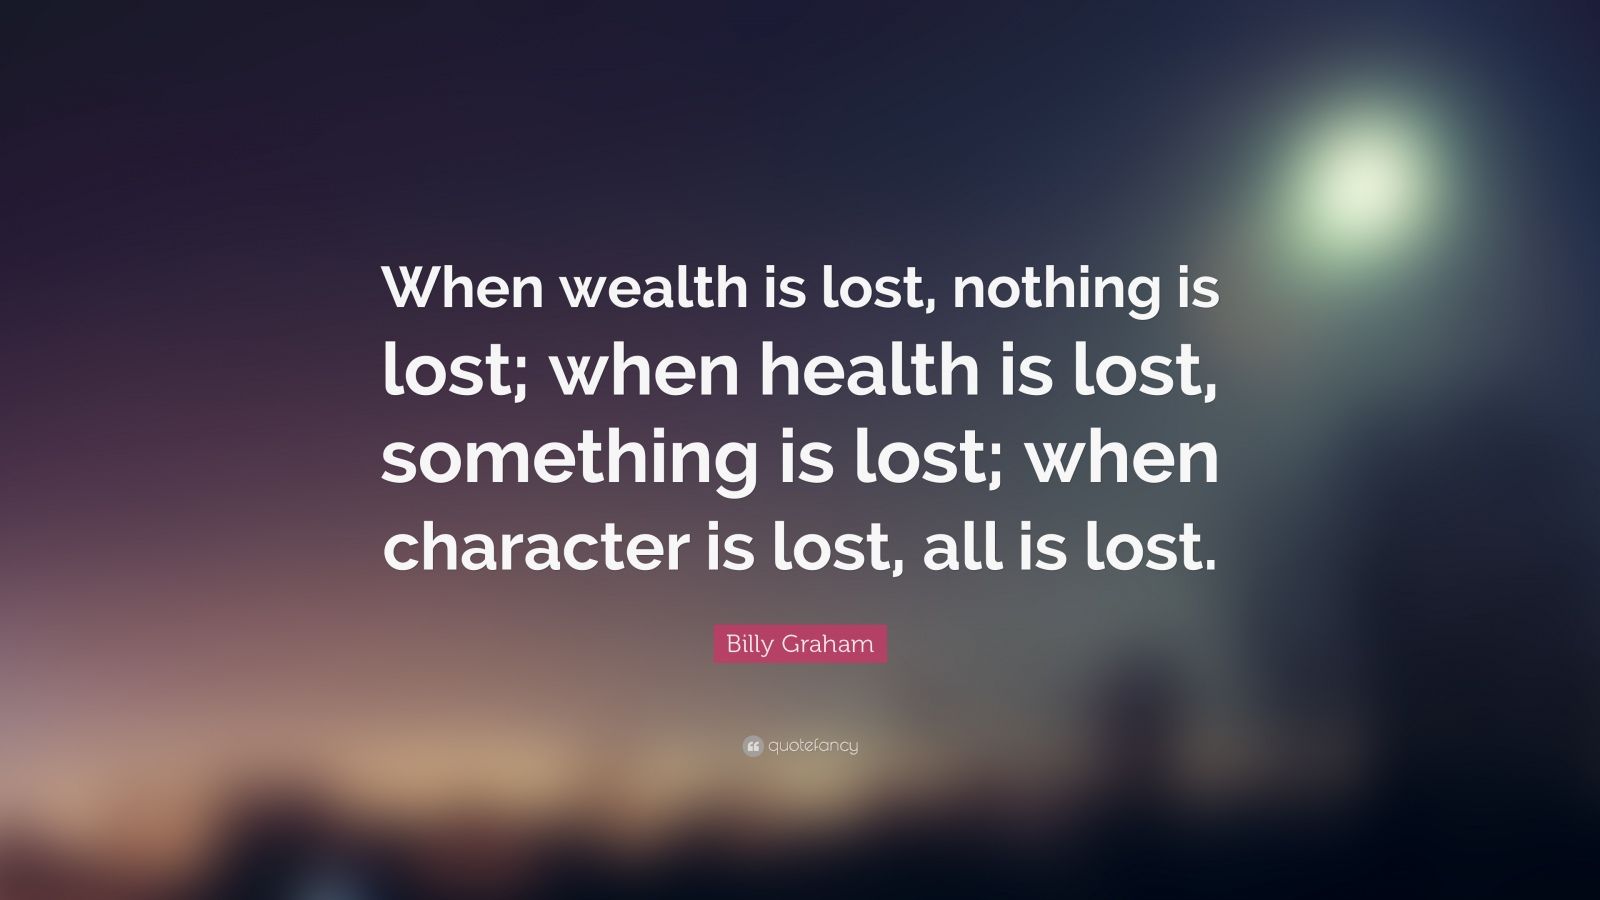 Billy Graham Quote: “When wealth is lost, nothing is lost ...